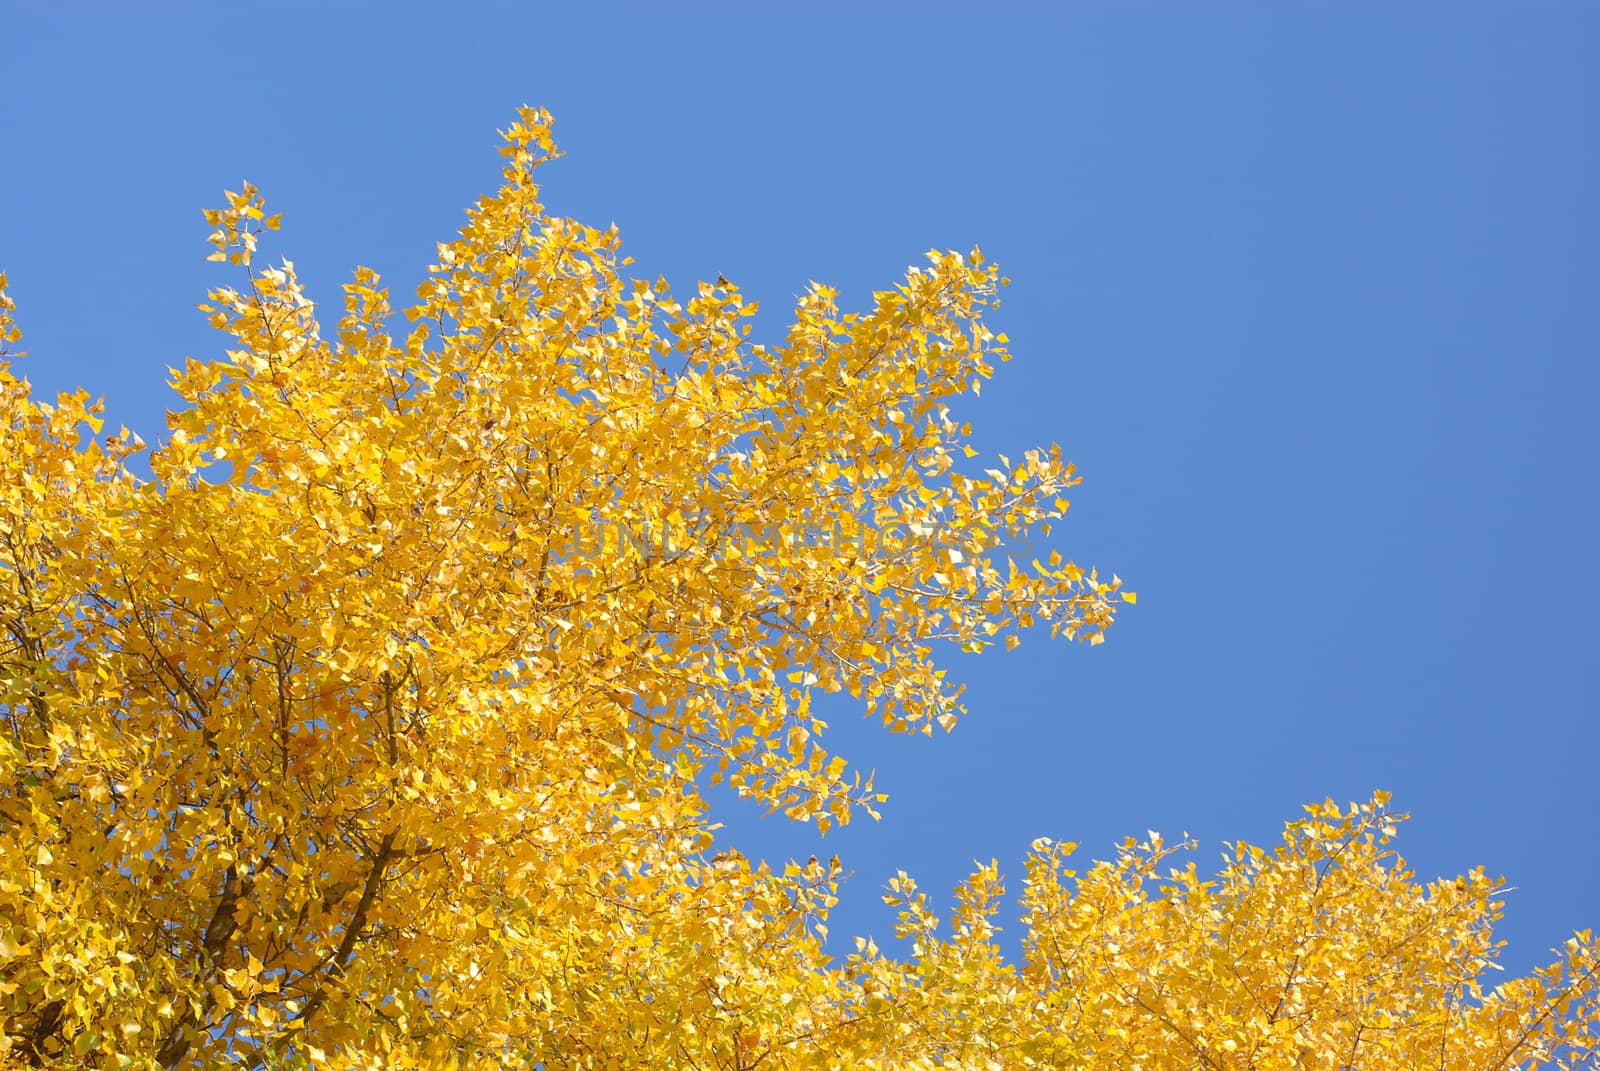 Poland gold autumn. Yellow leaves on a blue sky.